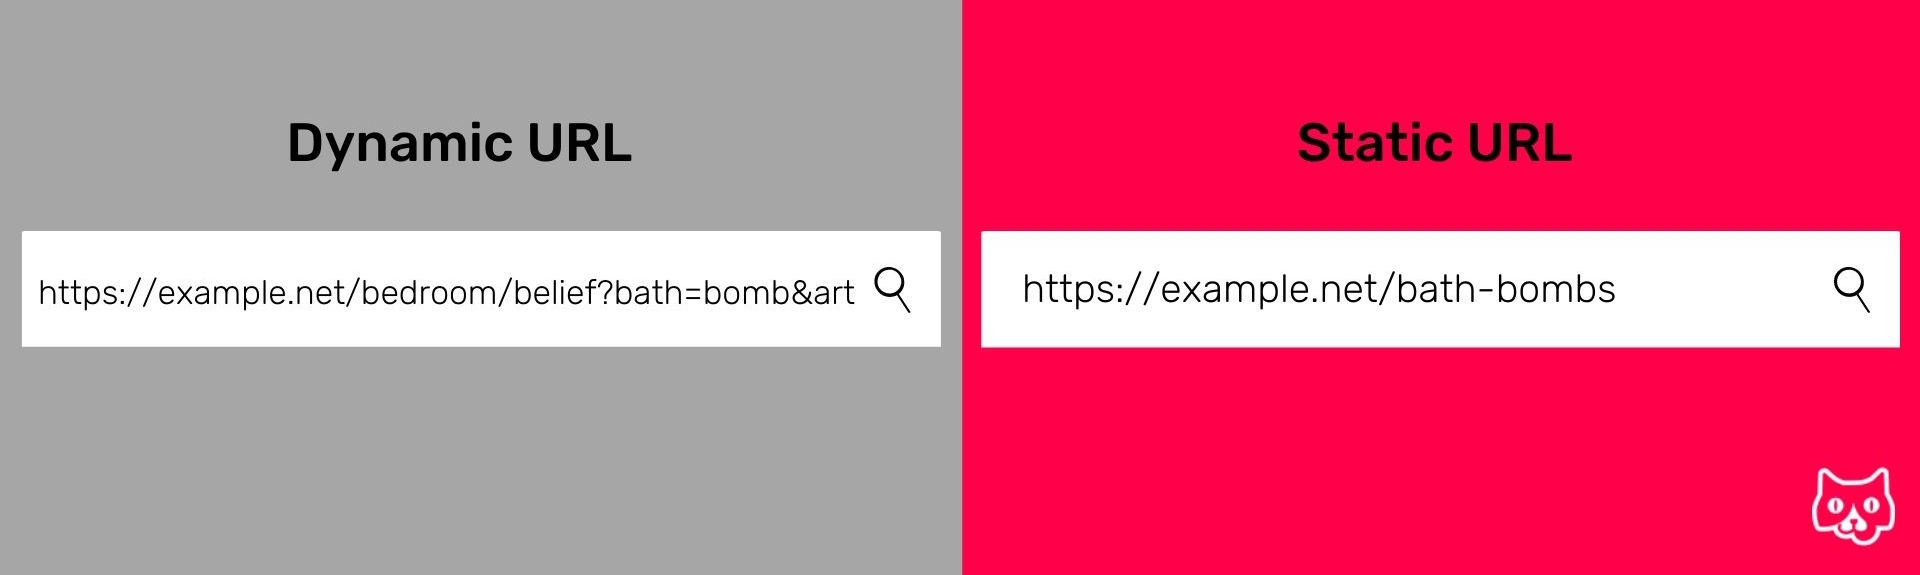 This image shows a dynamic URL on the left and a Static URL on the right to depict the differences between the two